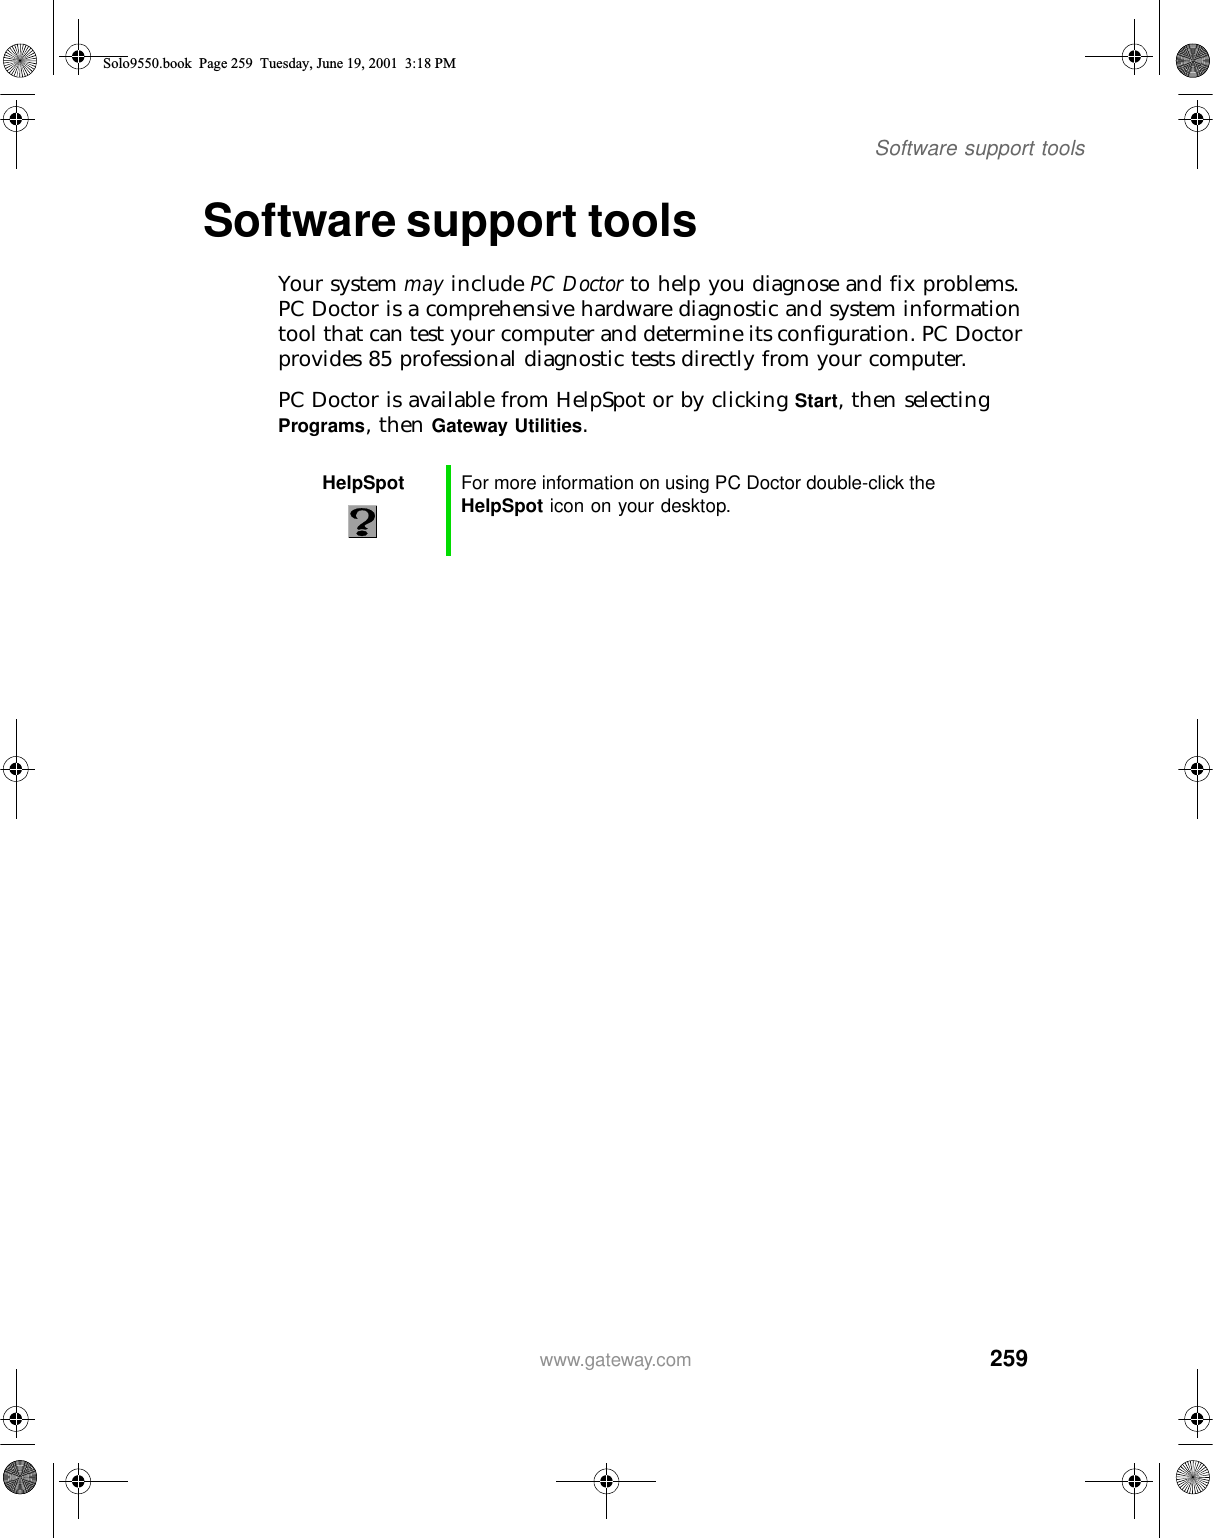 259Software support toolswww.gateway.comSoftware support toolsYour system may include PC Doctor to help you diagnose and fix problems. PC Doctor is a comprehensive hardware diagnostic and system information tool that can test your computer and determine its configuration. PC Doctor provides 85 professional diagnostic tests directly from your computer.PC Doctor is available from HelpSpot or by clicking Start, then selecting Programs, then Gateway Utilities.HelpSpot For more information on using PC Doctor double-click the HelpSpot icon on your desktop.Solo9550.book Page 259 Tuesday, June 19, 2001 3:18 PM